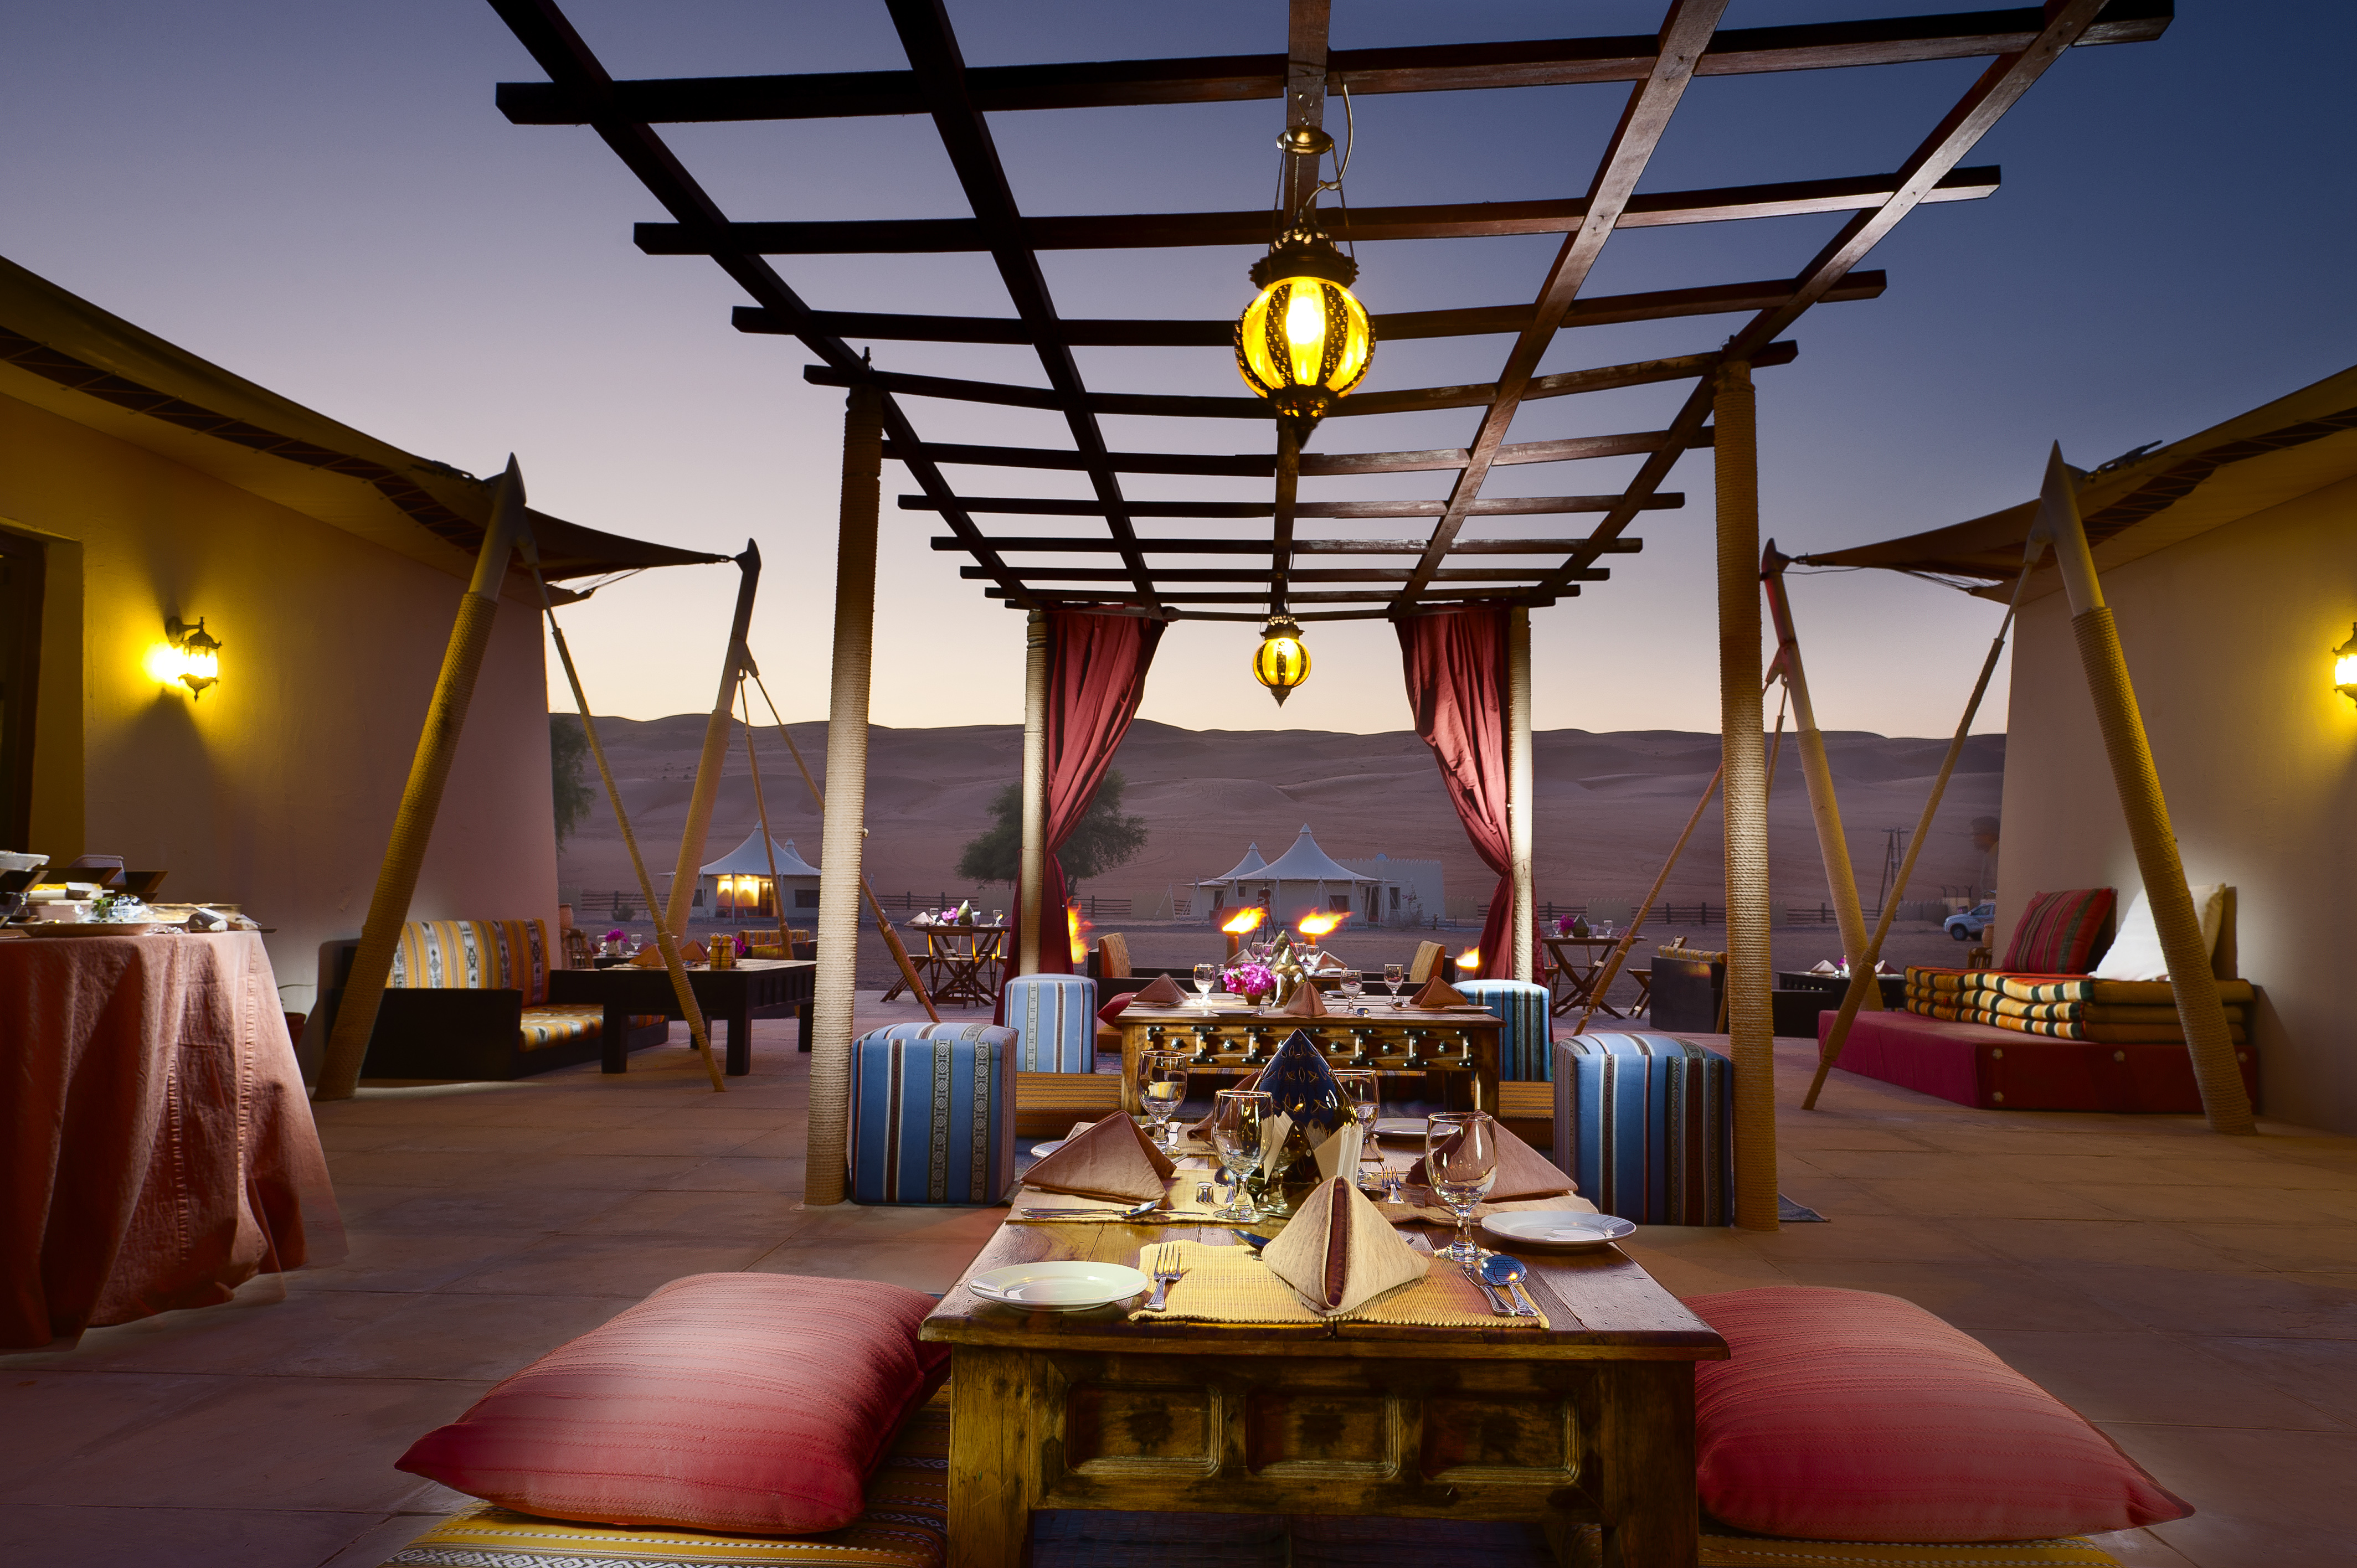 Dining area at Wahba Sands Desert Nights Camp, Oman.